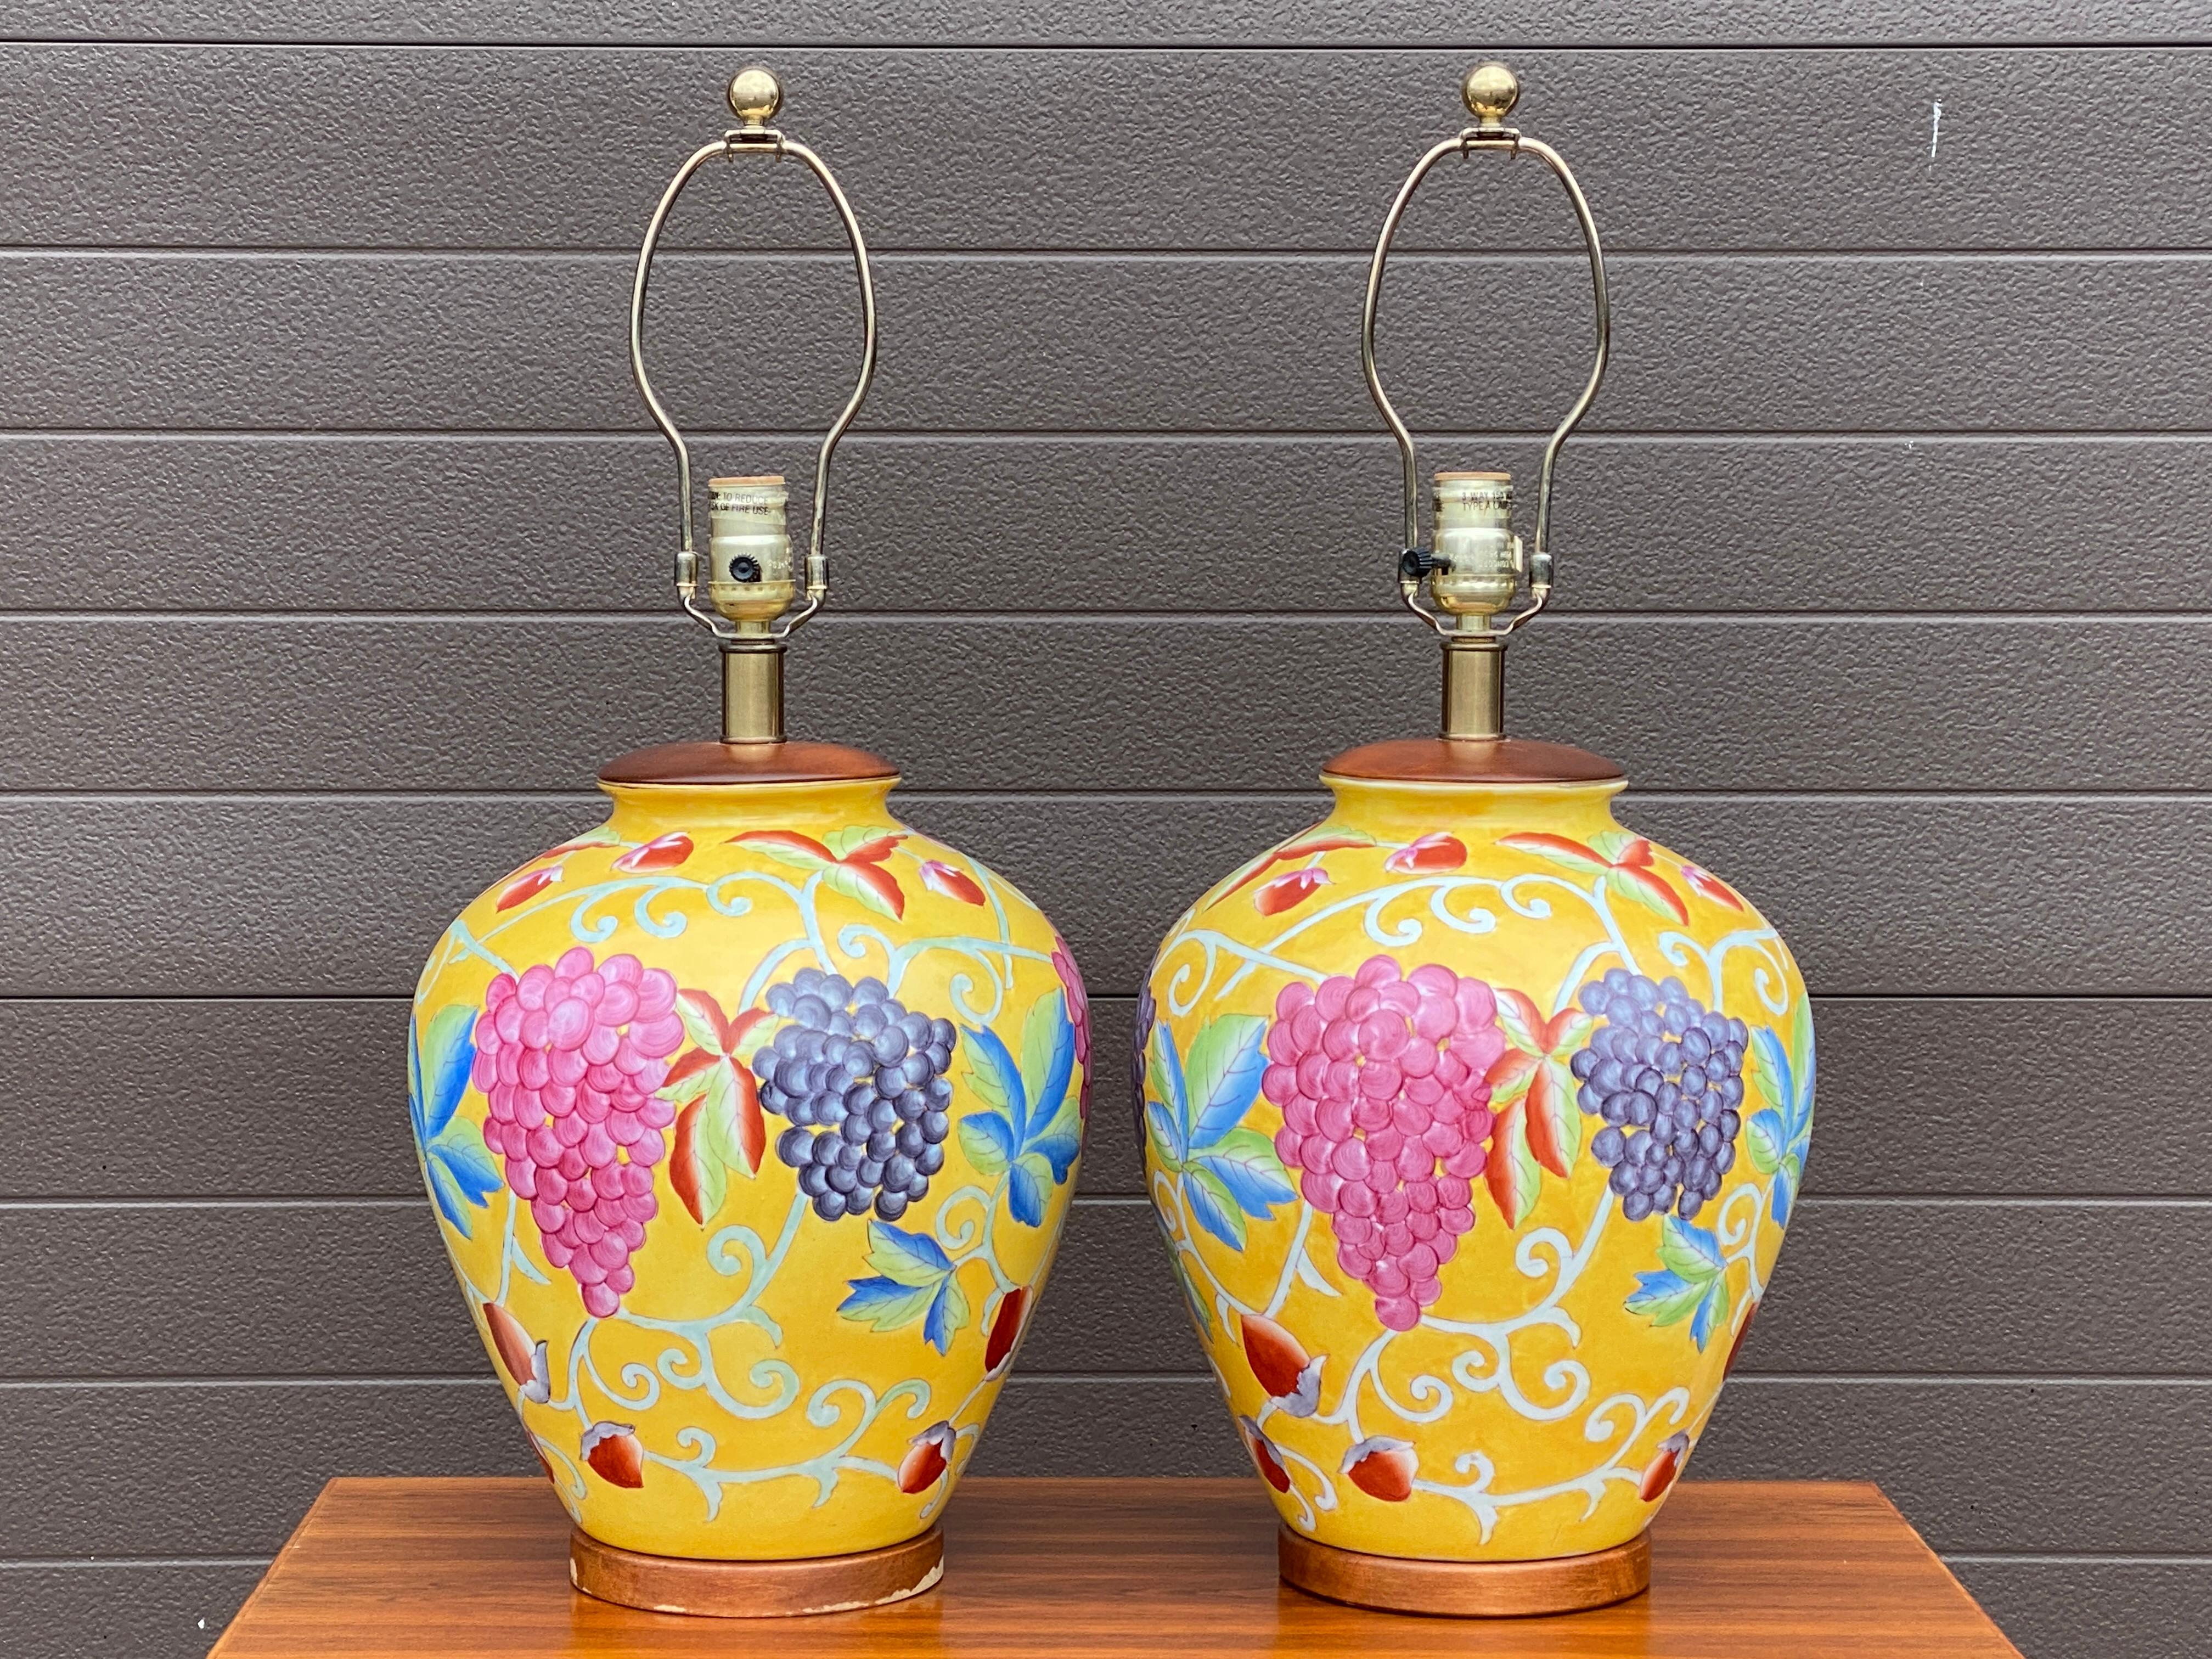 A quality pair of table lamps by Tyndale of Chicago featuring hand painted fruit motifs.

18” tall to top of bulb socket